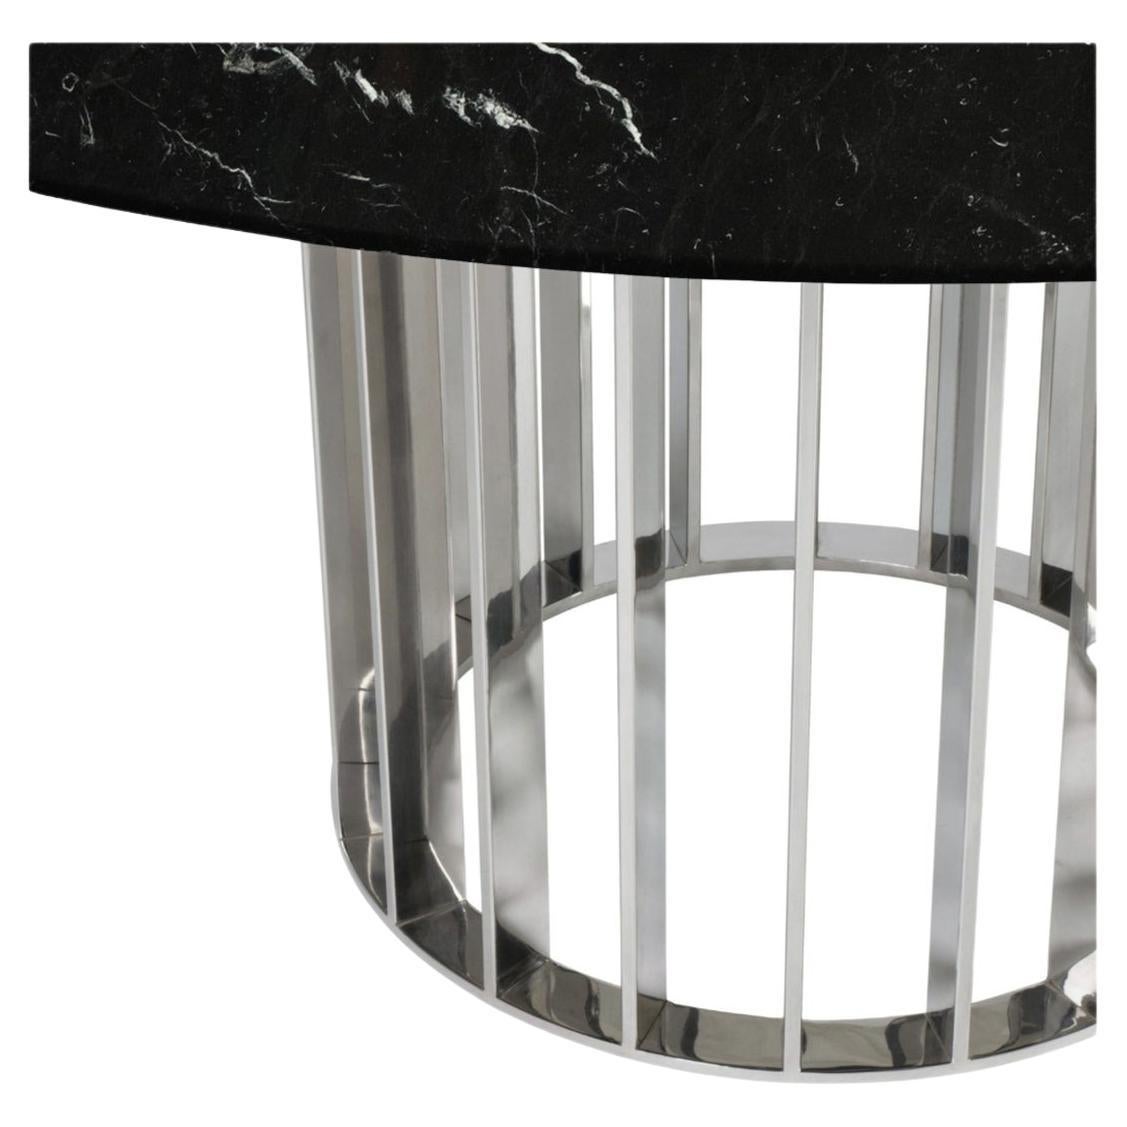 This unique dining table uses gorgeous Black marble top and elegant and modern stainless steel base uses the repetition of metal stripes to bring rhythm to the base. Its design is simple but full of grace and WOW factor. 
The best craftsmanship was